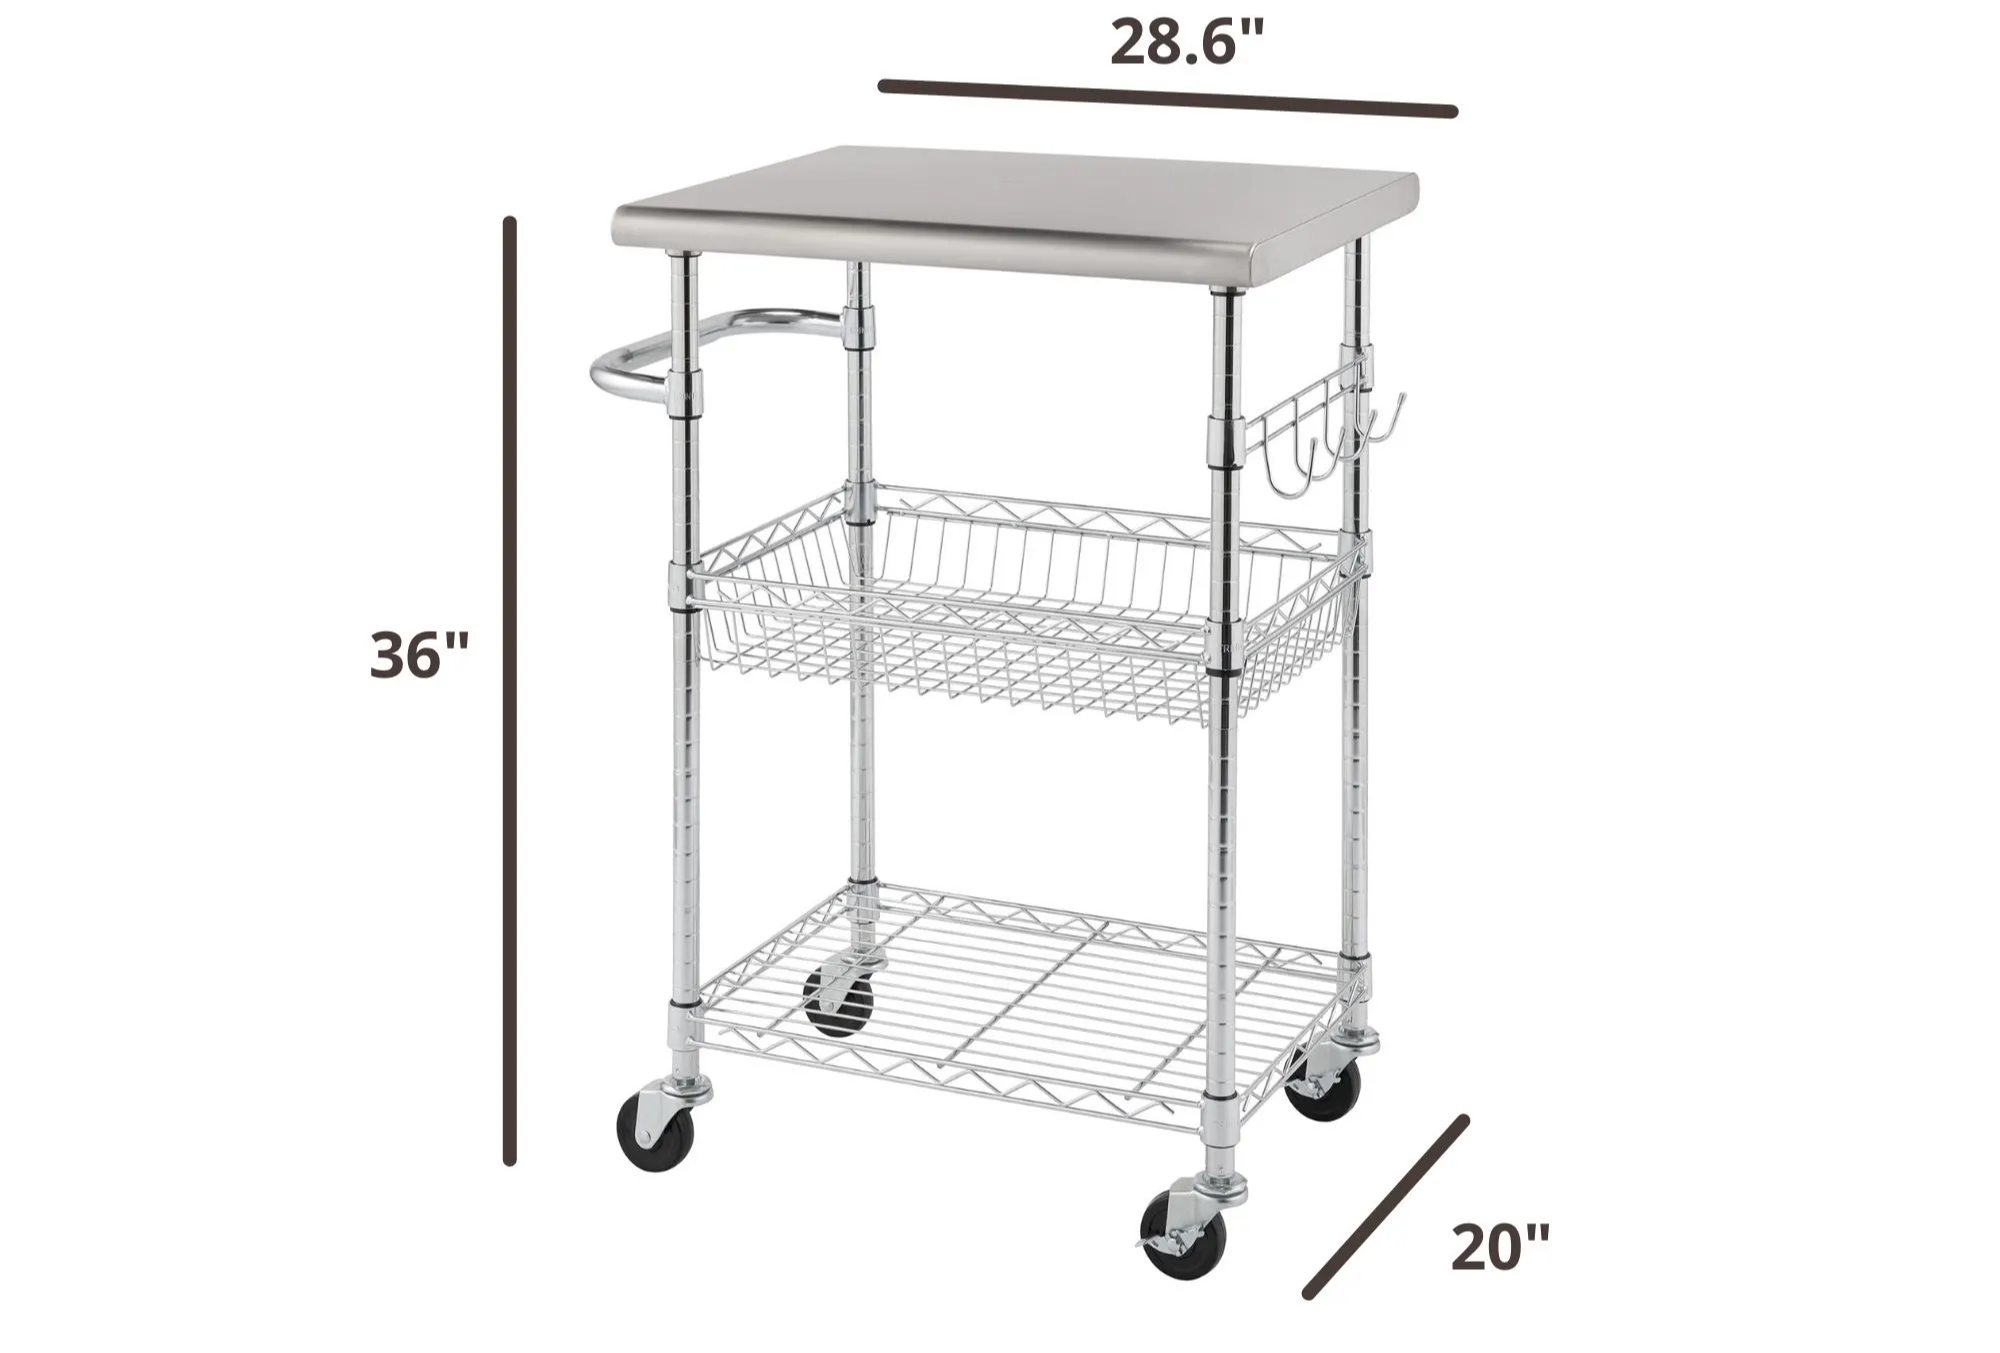 36 inches tall by 28.6 inches wide by 20 inches deep stainless steel kitchen cart